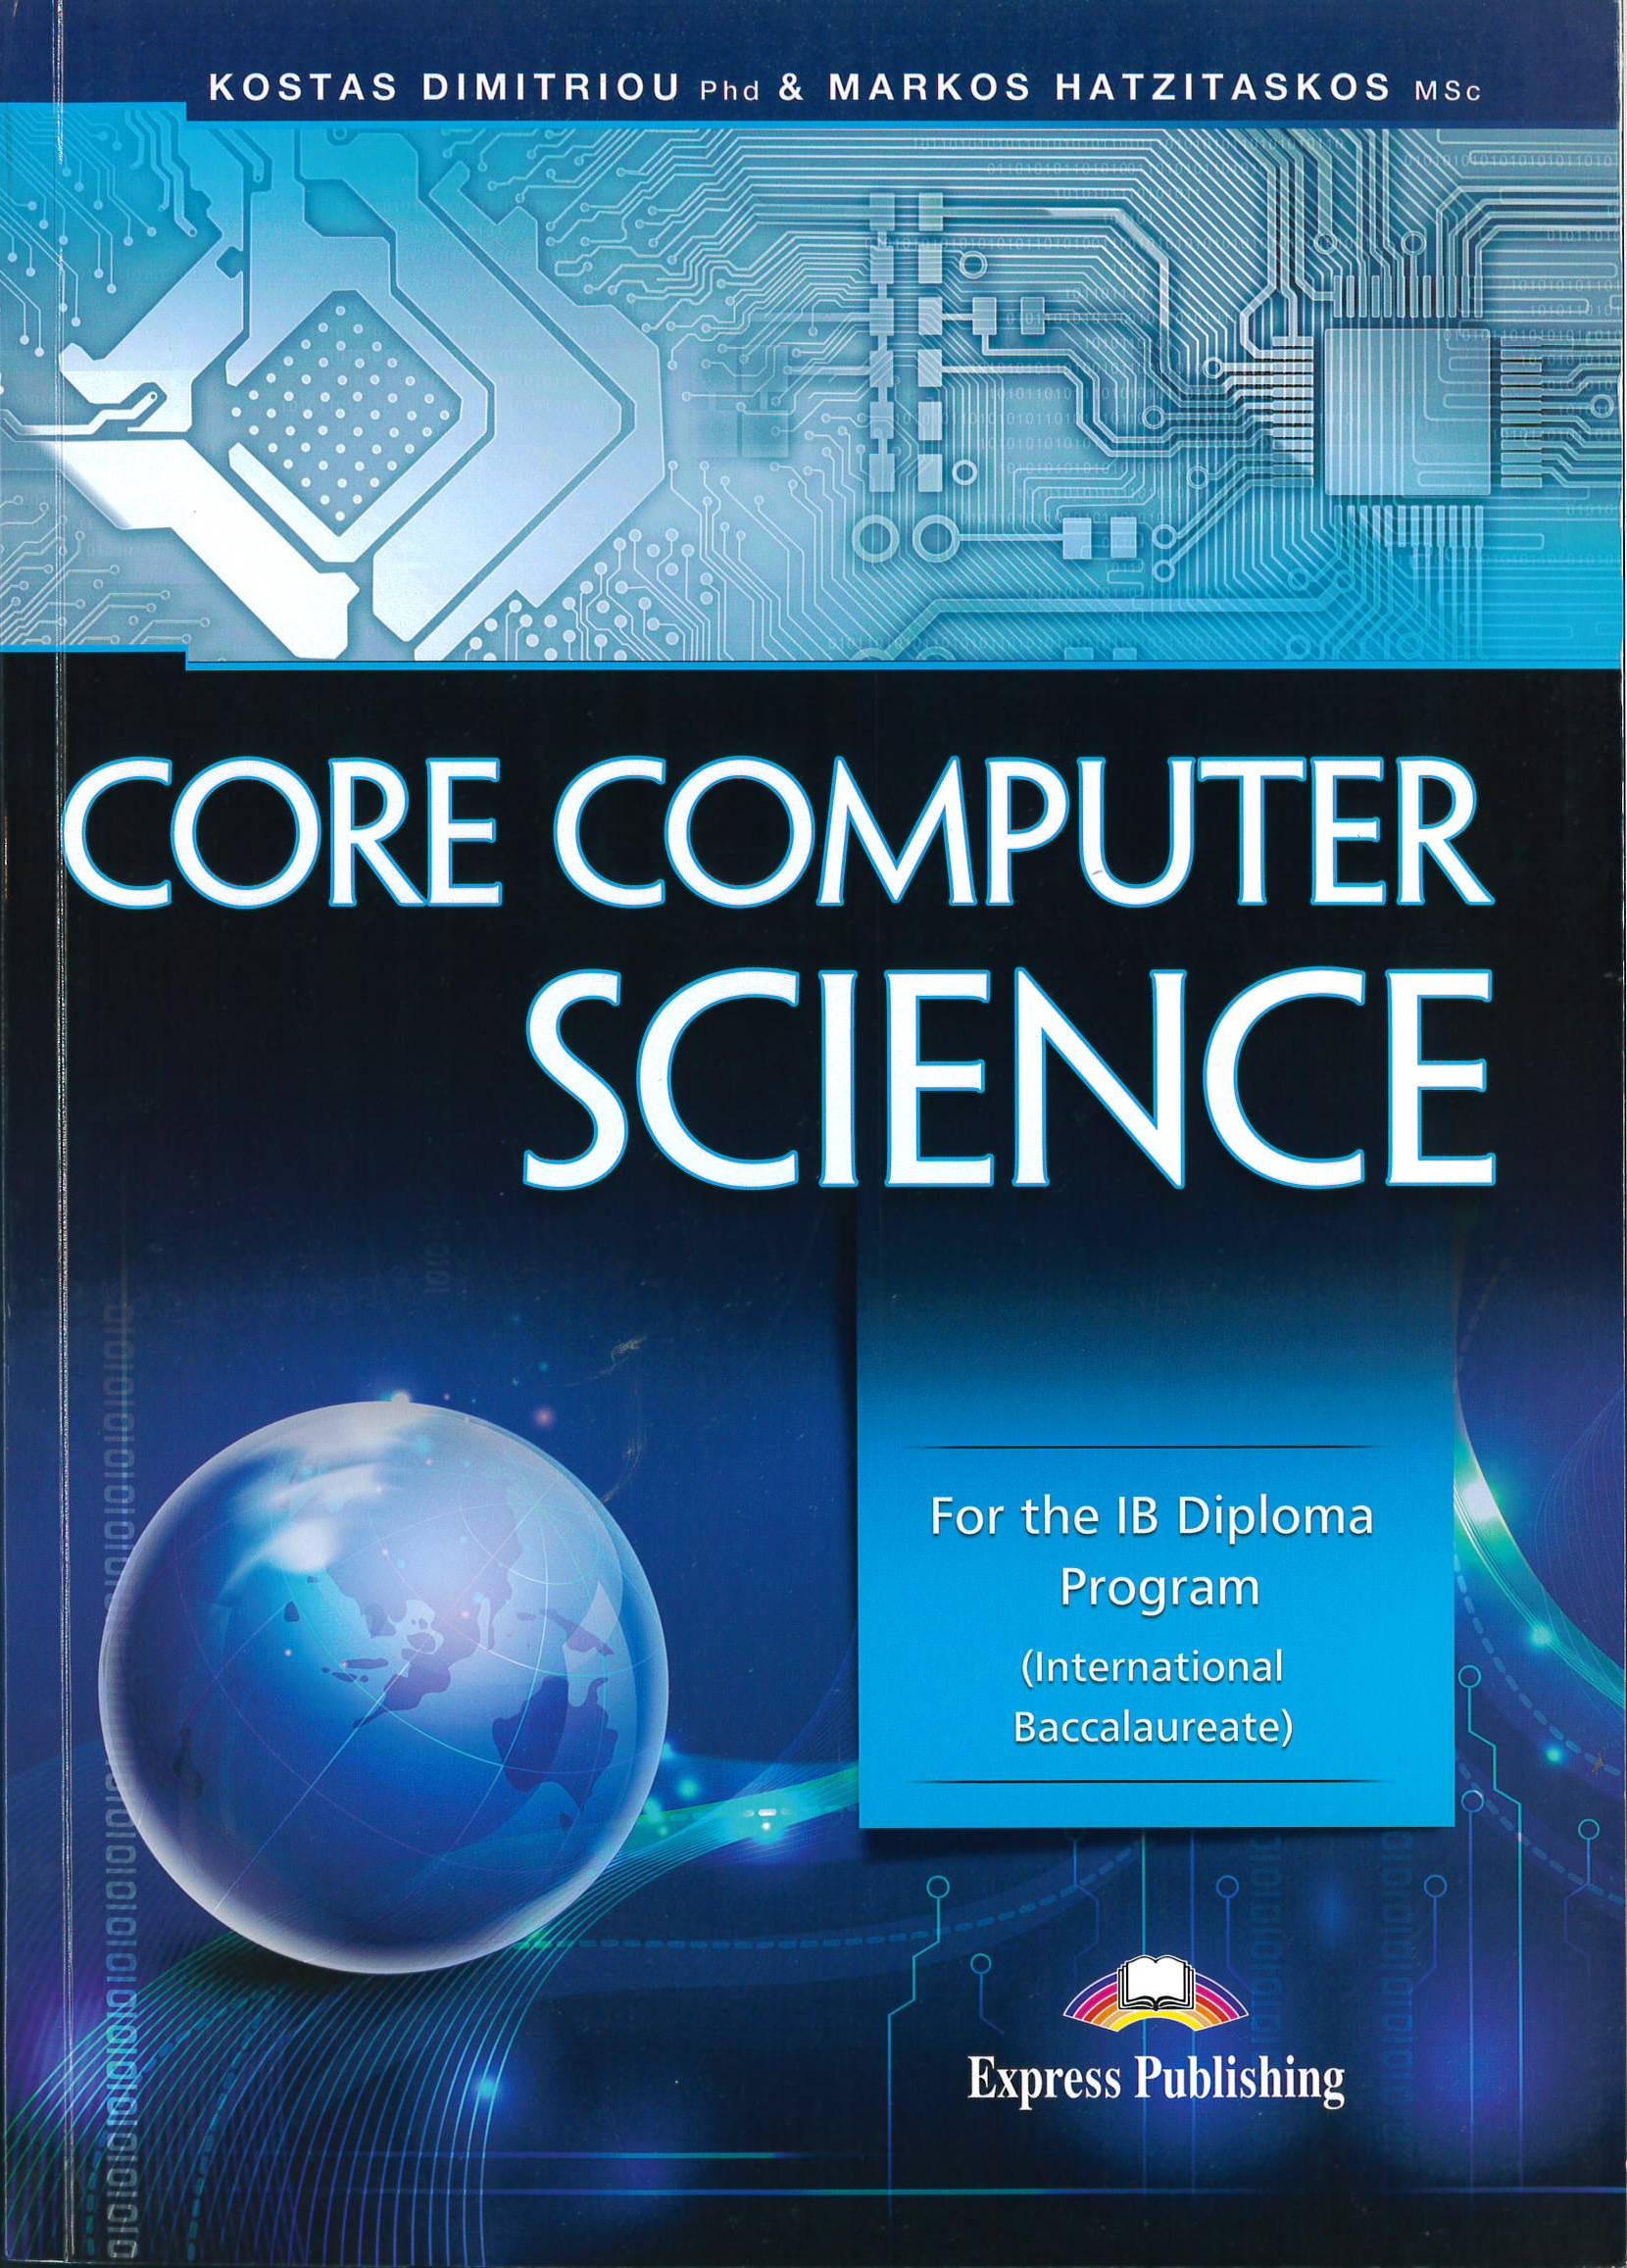 Core computer science : for the IB diploma program